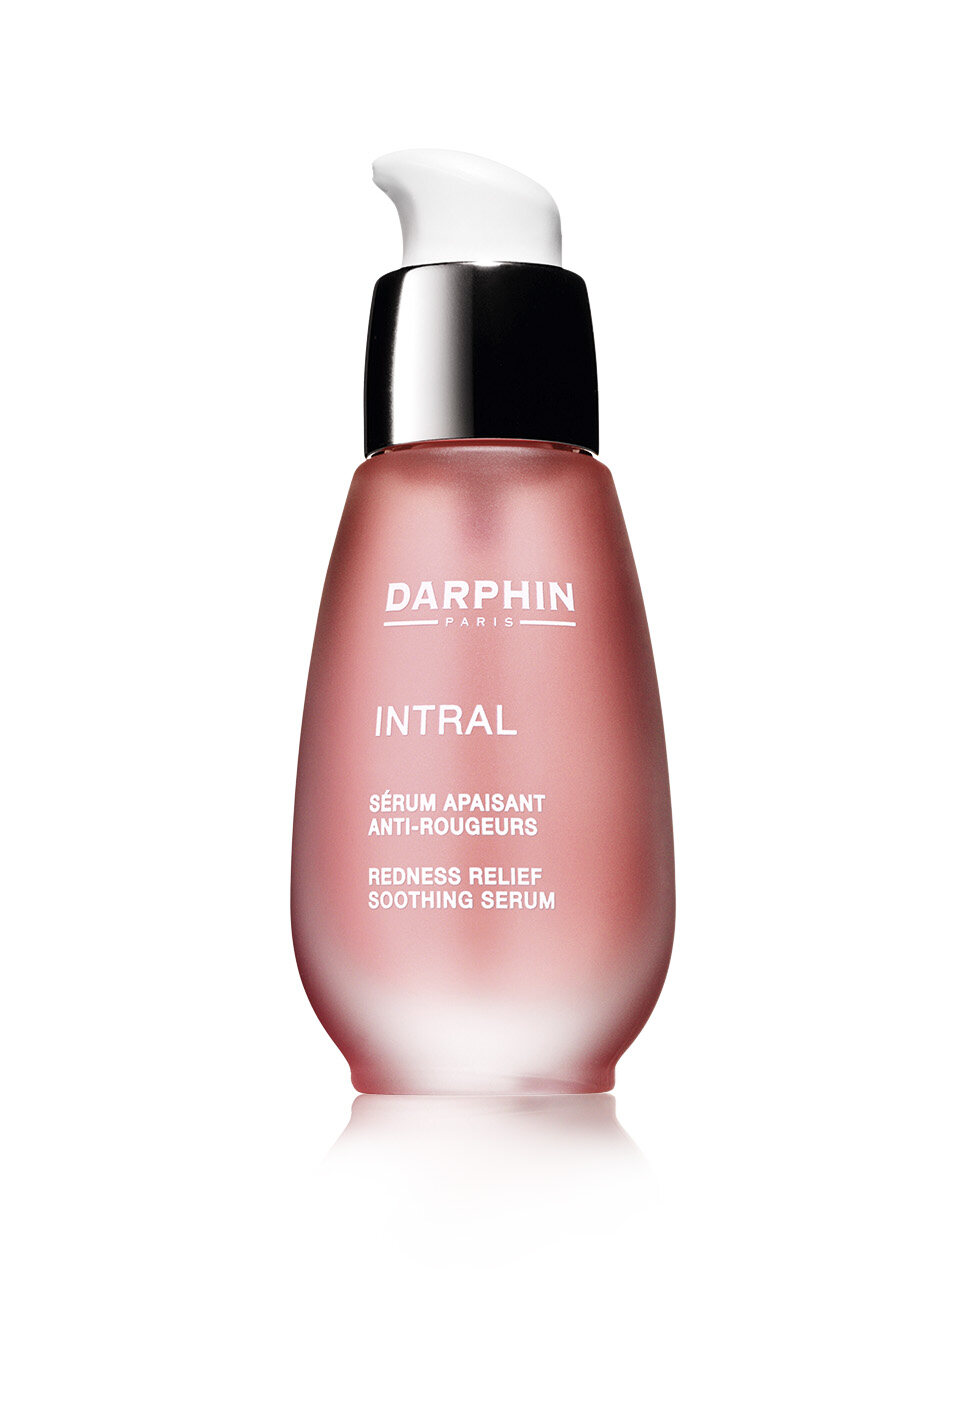 Darphin Intral Redness Relief Soothing Serum $640/50ml